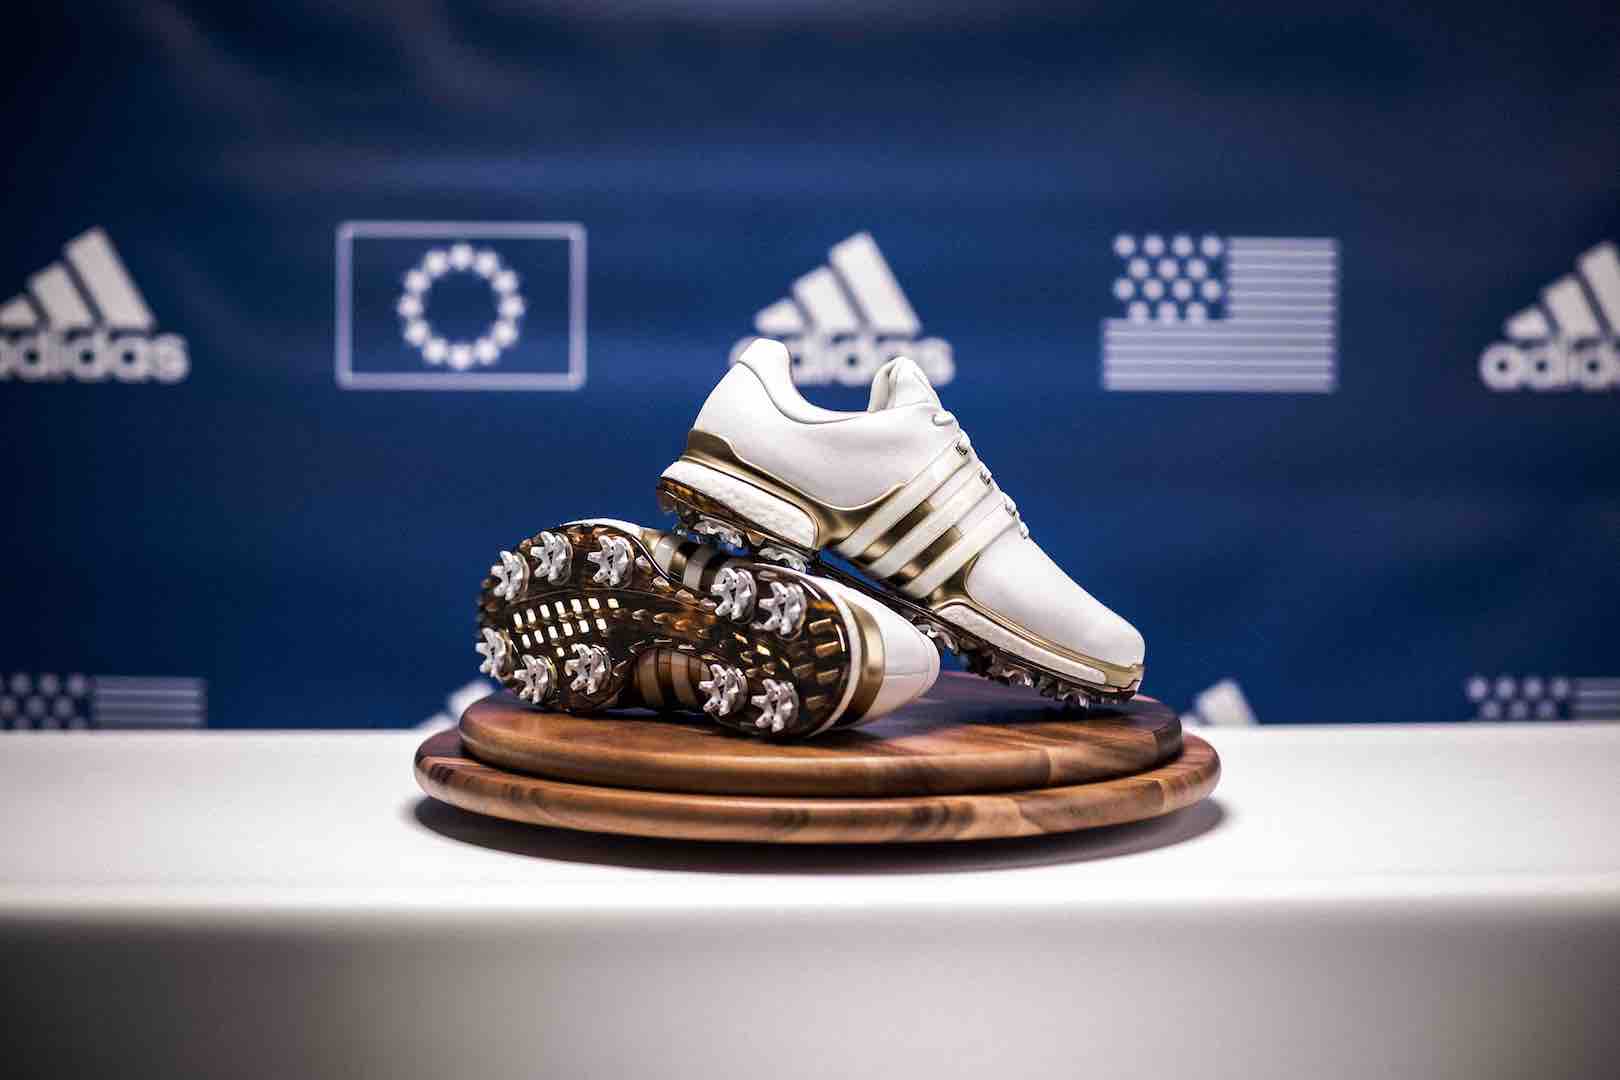 adidas limited edition golf shoes